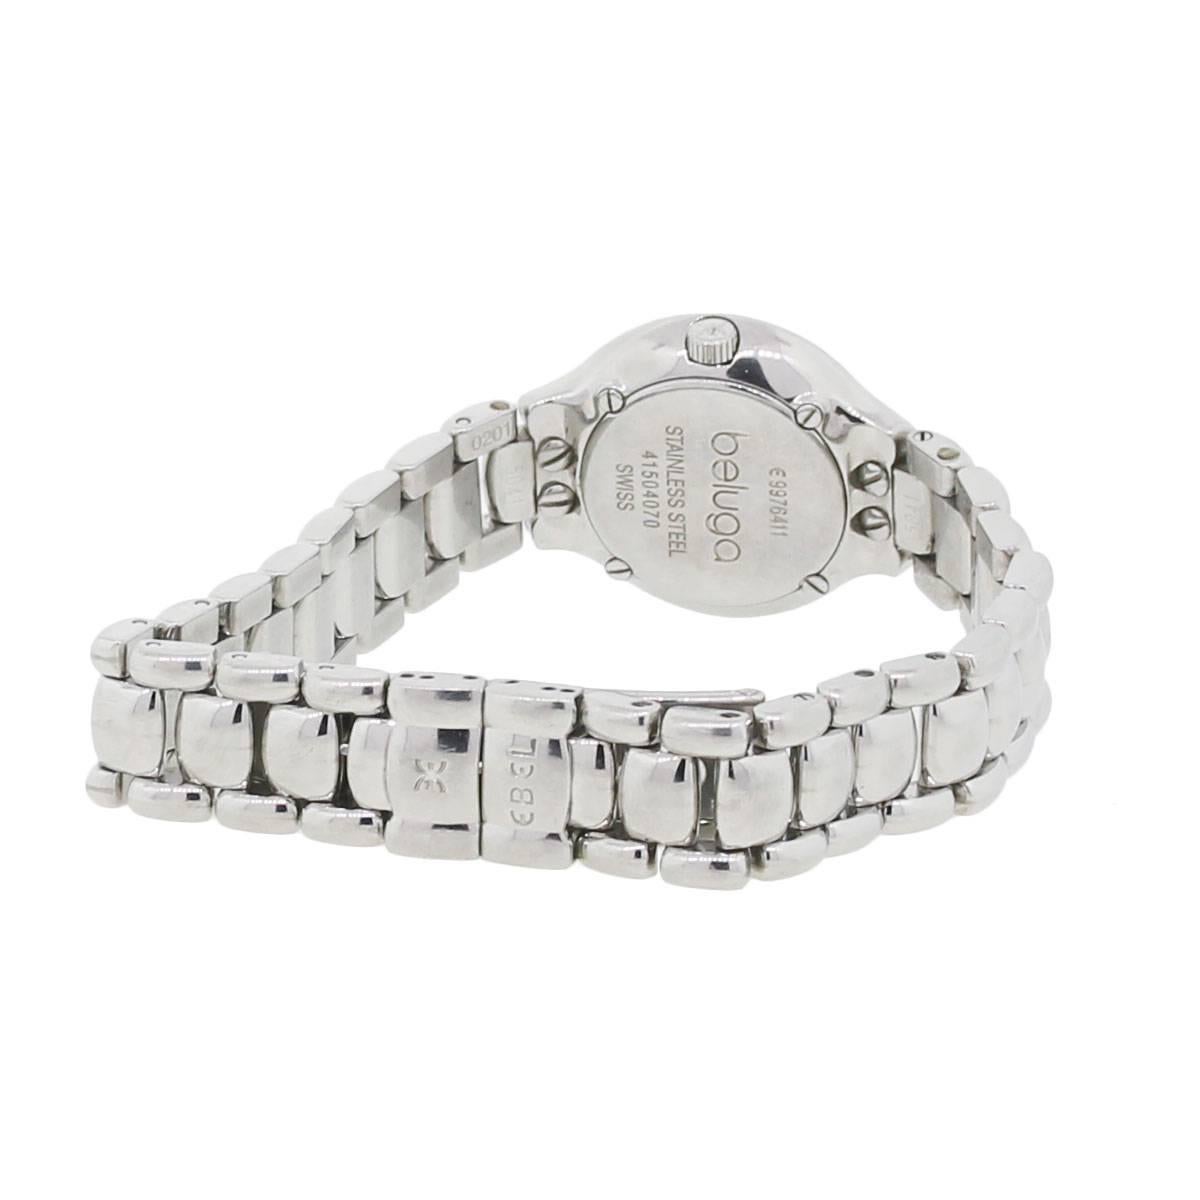 Brand: Ebel
Style: Beluga
MPN: E9976-11
Case Material: Stainless steel
Case Diameter: 27mm
Bezel: Stainless steel
Dial: Mother of pearl diamond dial
Bracelet: Stainless steel
Crystal: Sapphire
Size: Will fit a 6.50″ wrist
Clasp: Fold over hidden